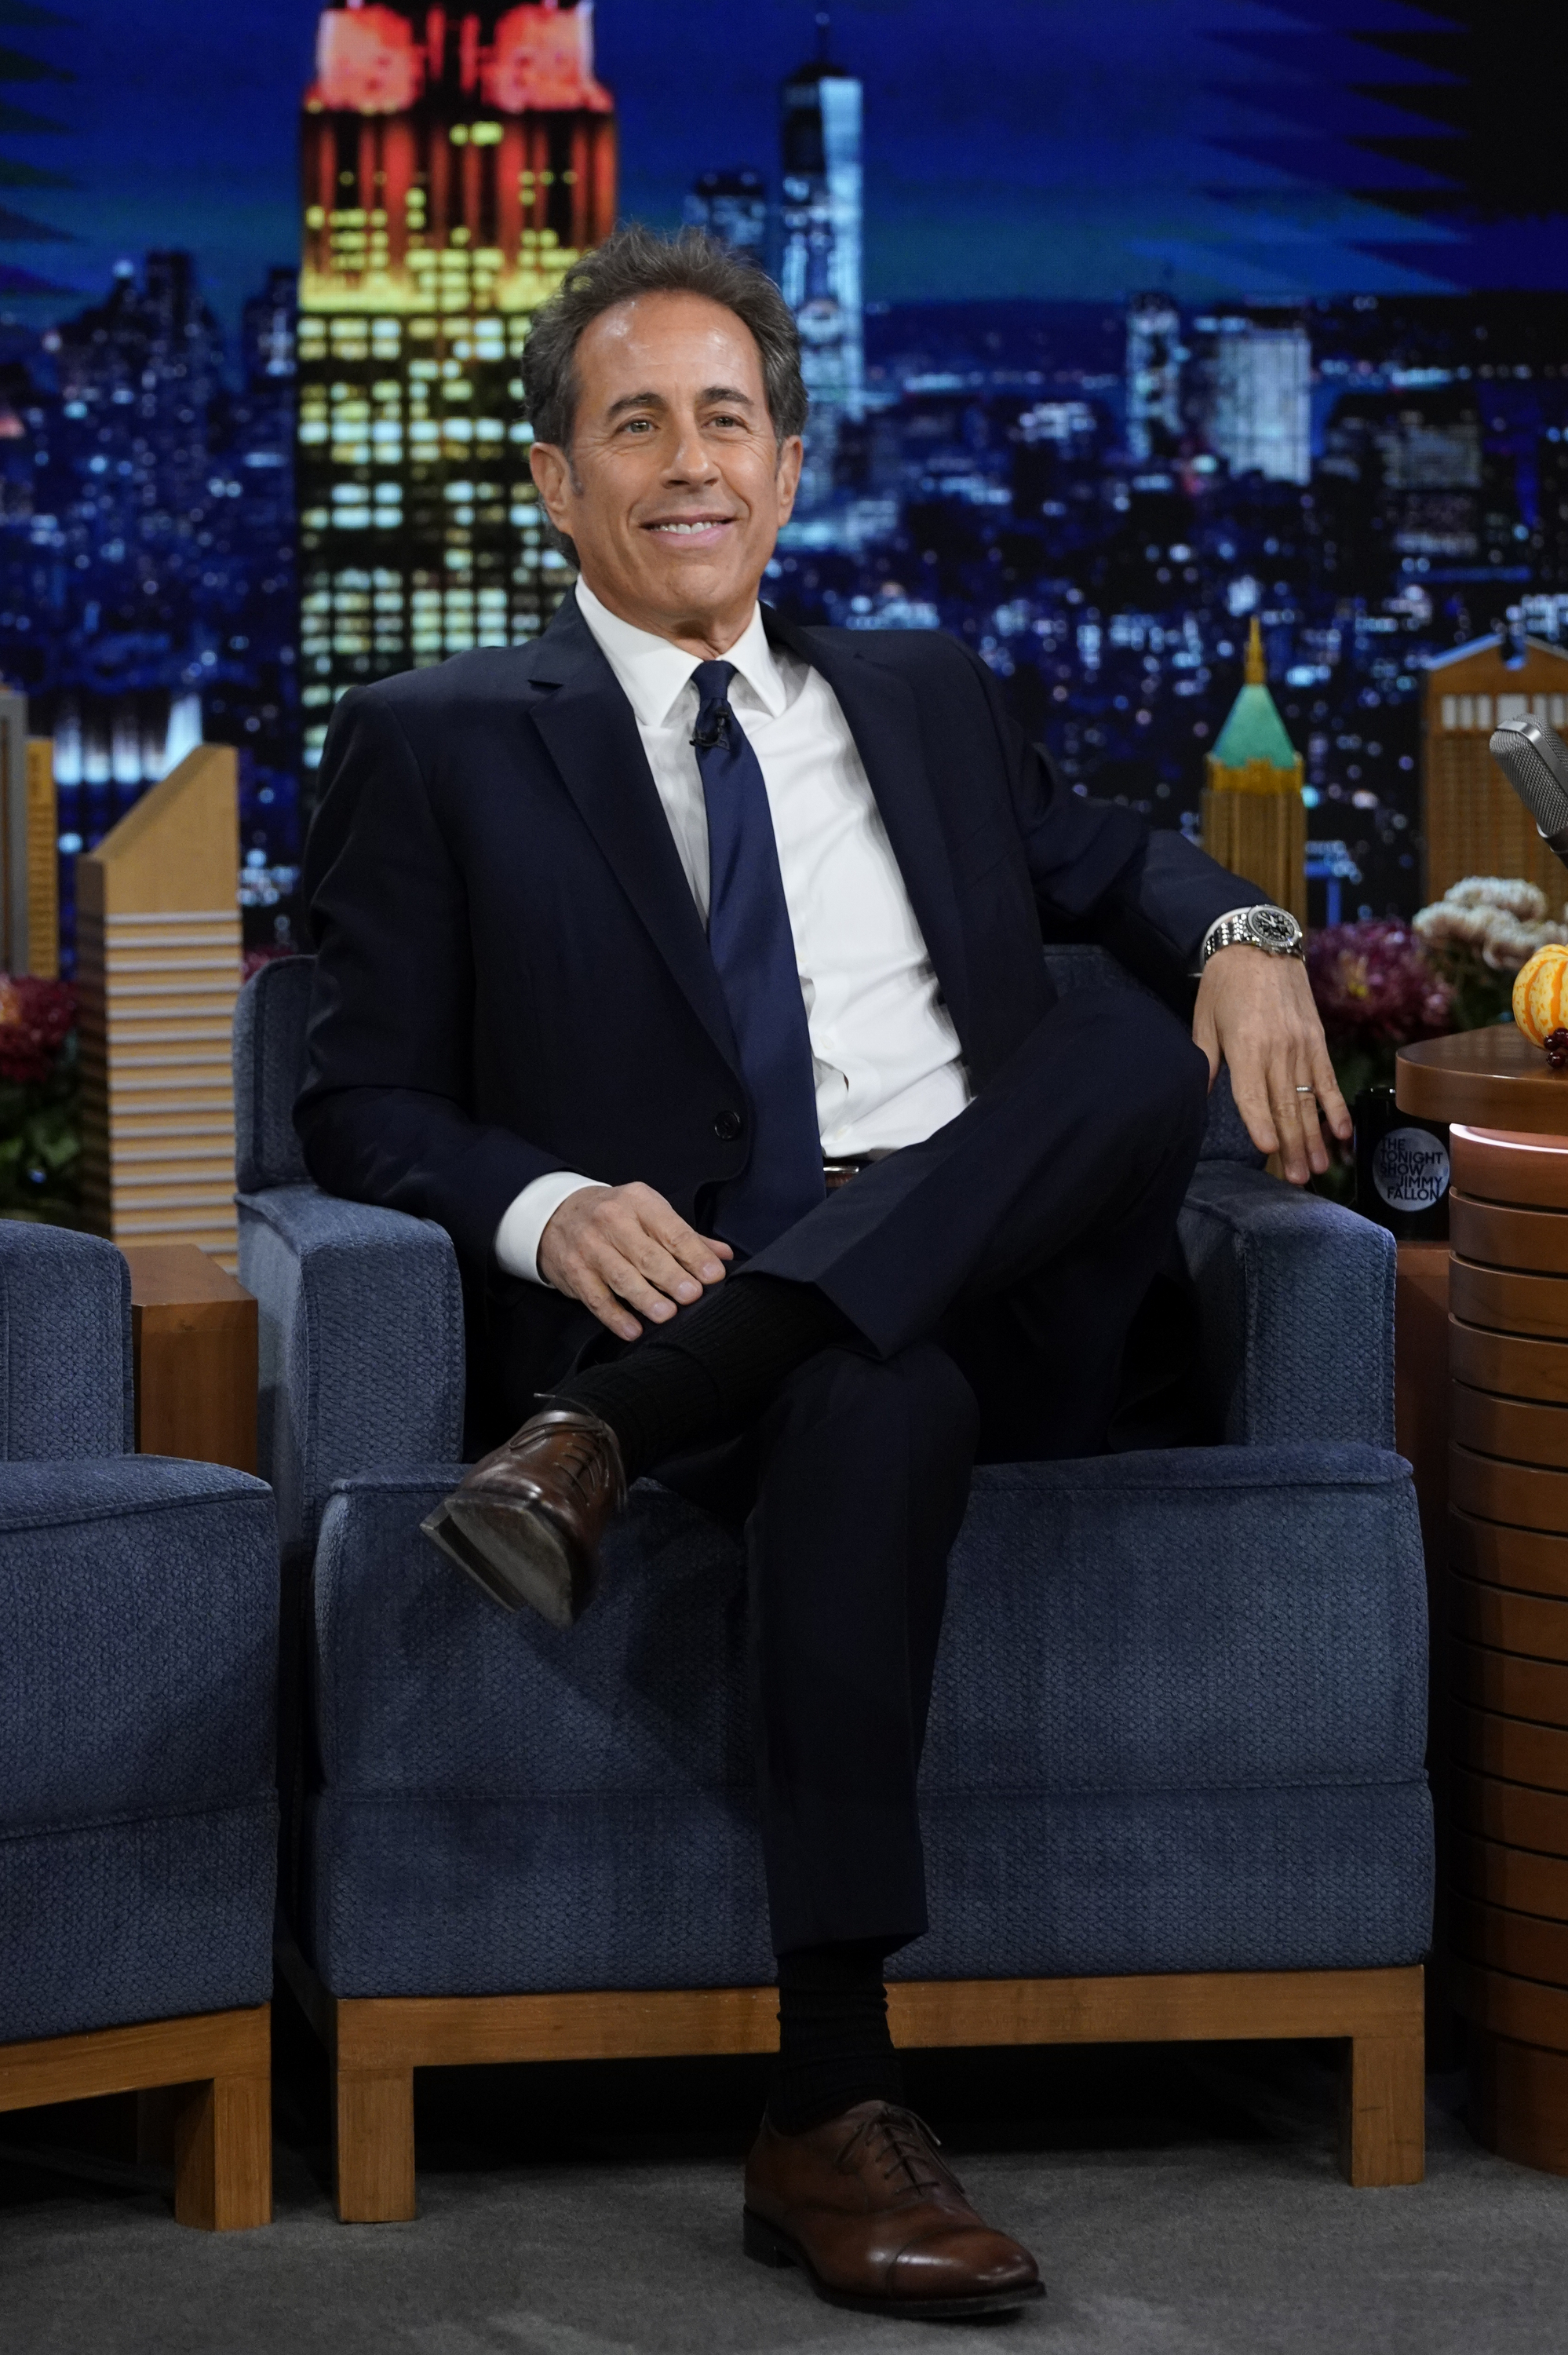 Comedian Jerry Seinfeld during an appearance on "The Tonight Show Starring Jimmy Fallon" on November 24, 2022 | Source: Getty Images